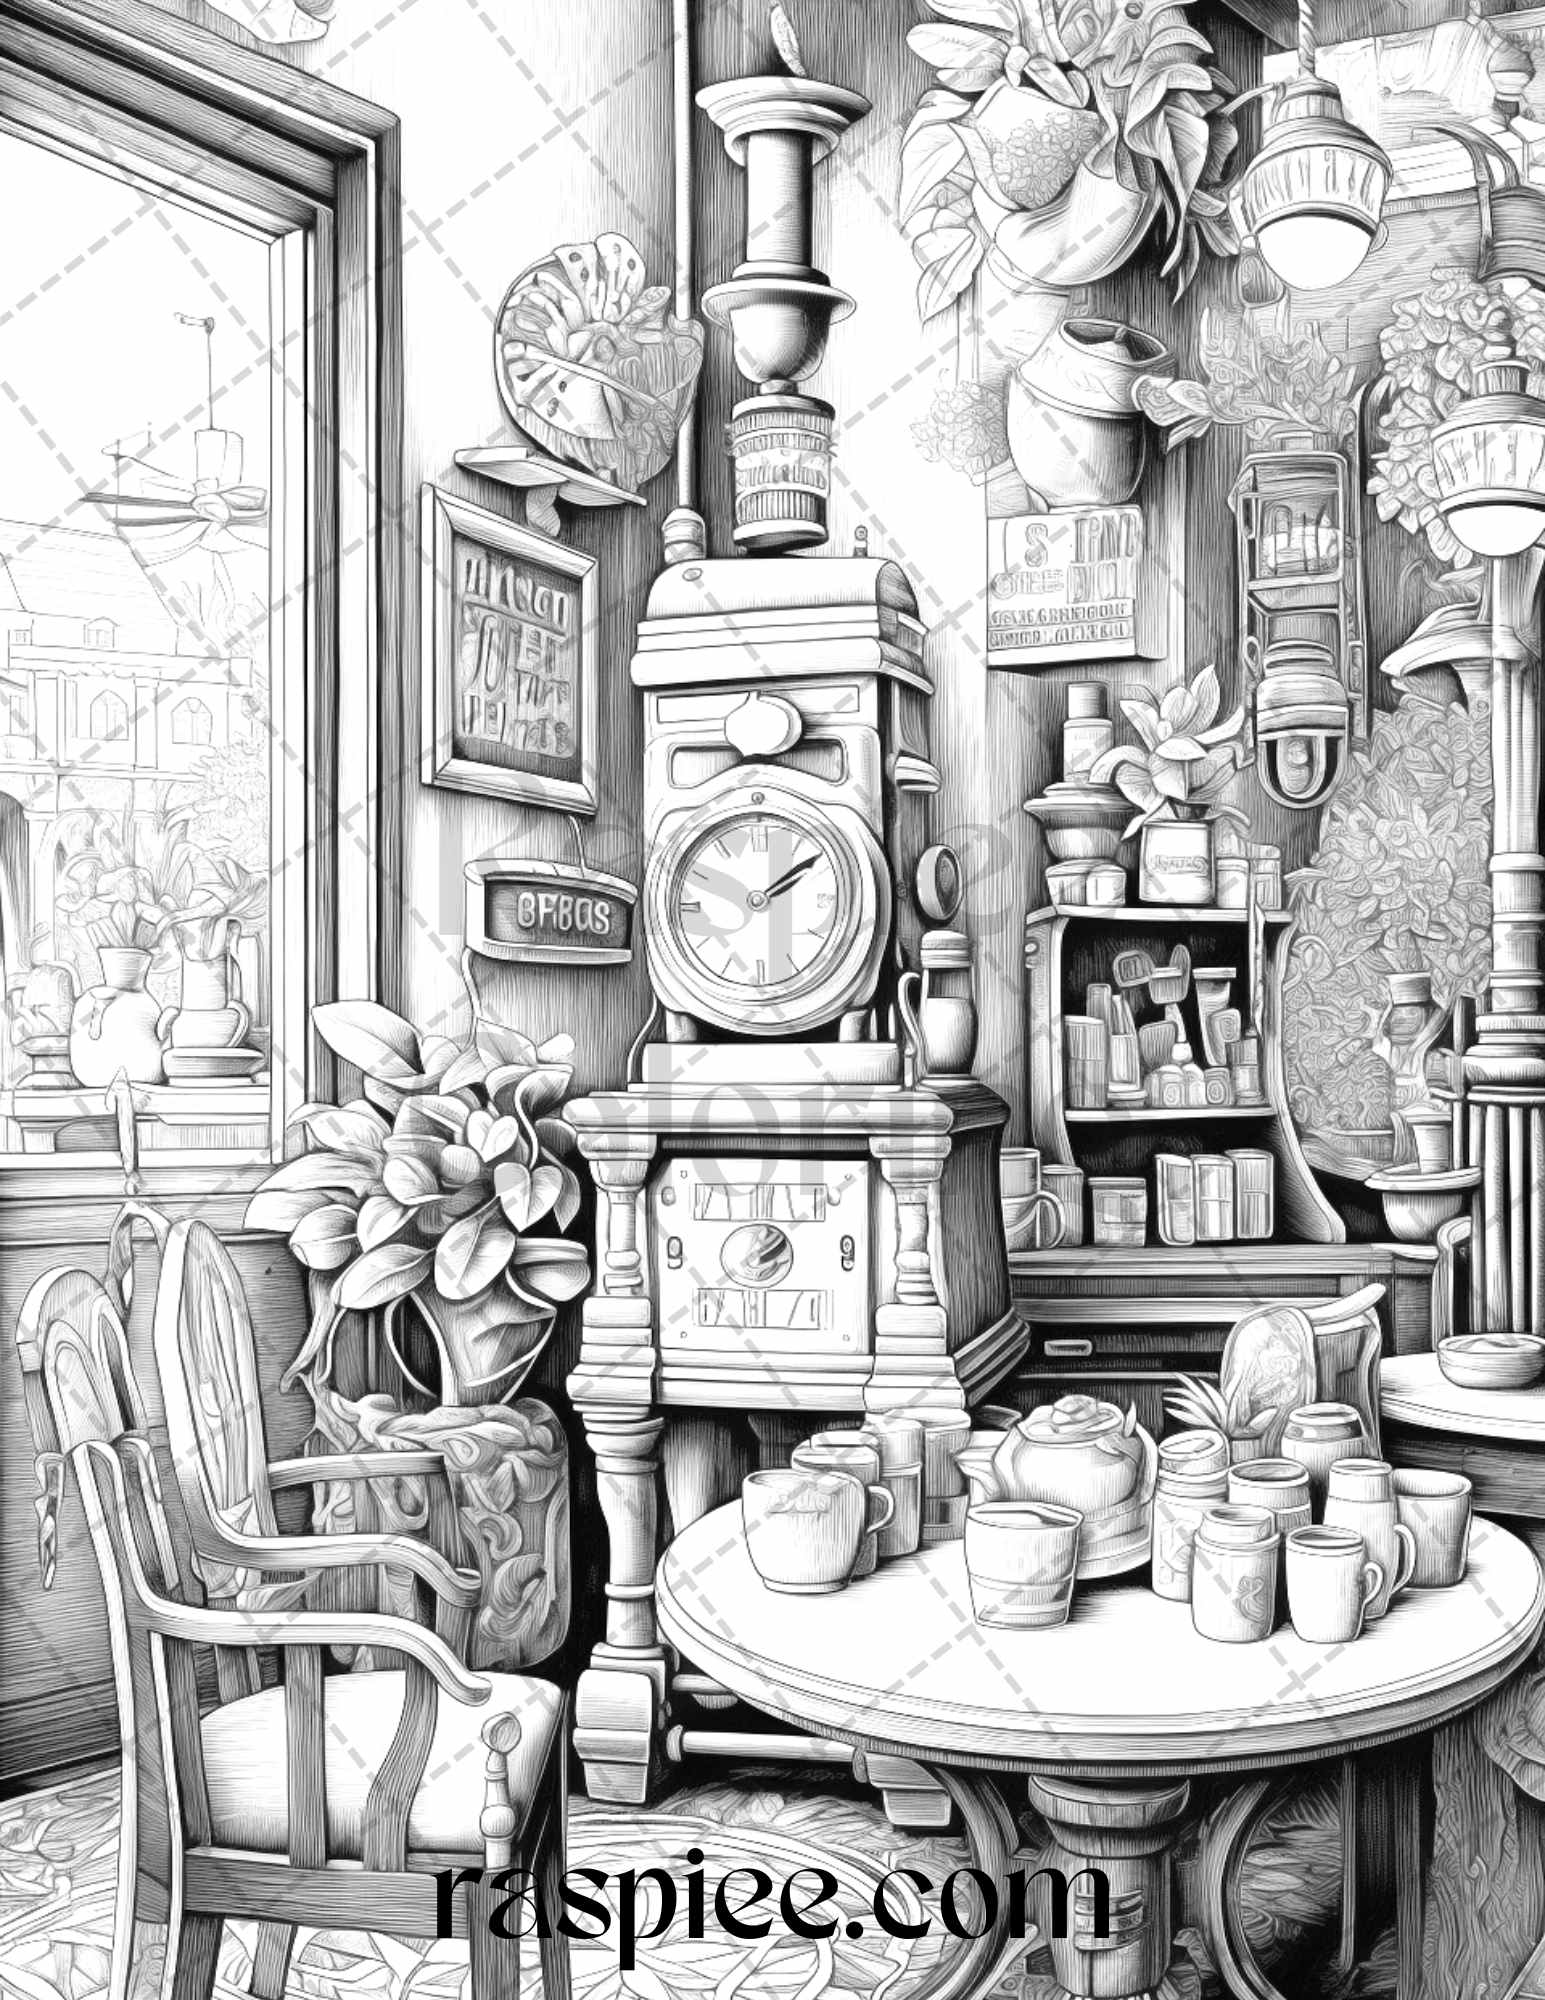 Cozy coffee shop grayscale coloring pages printable for adults pdf â coloring